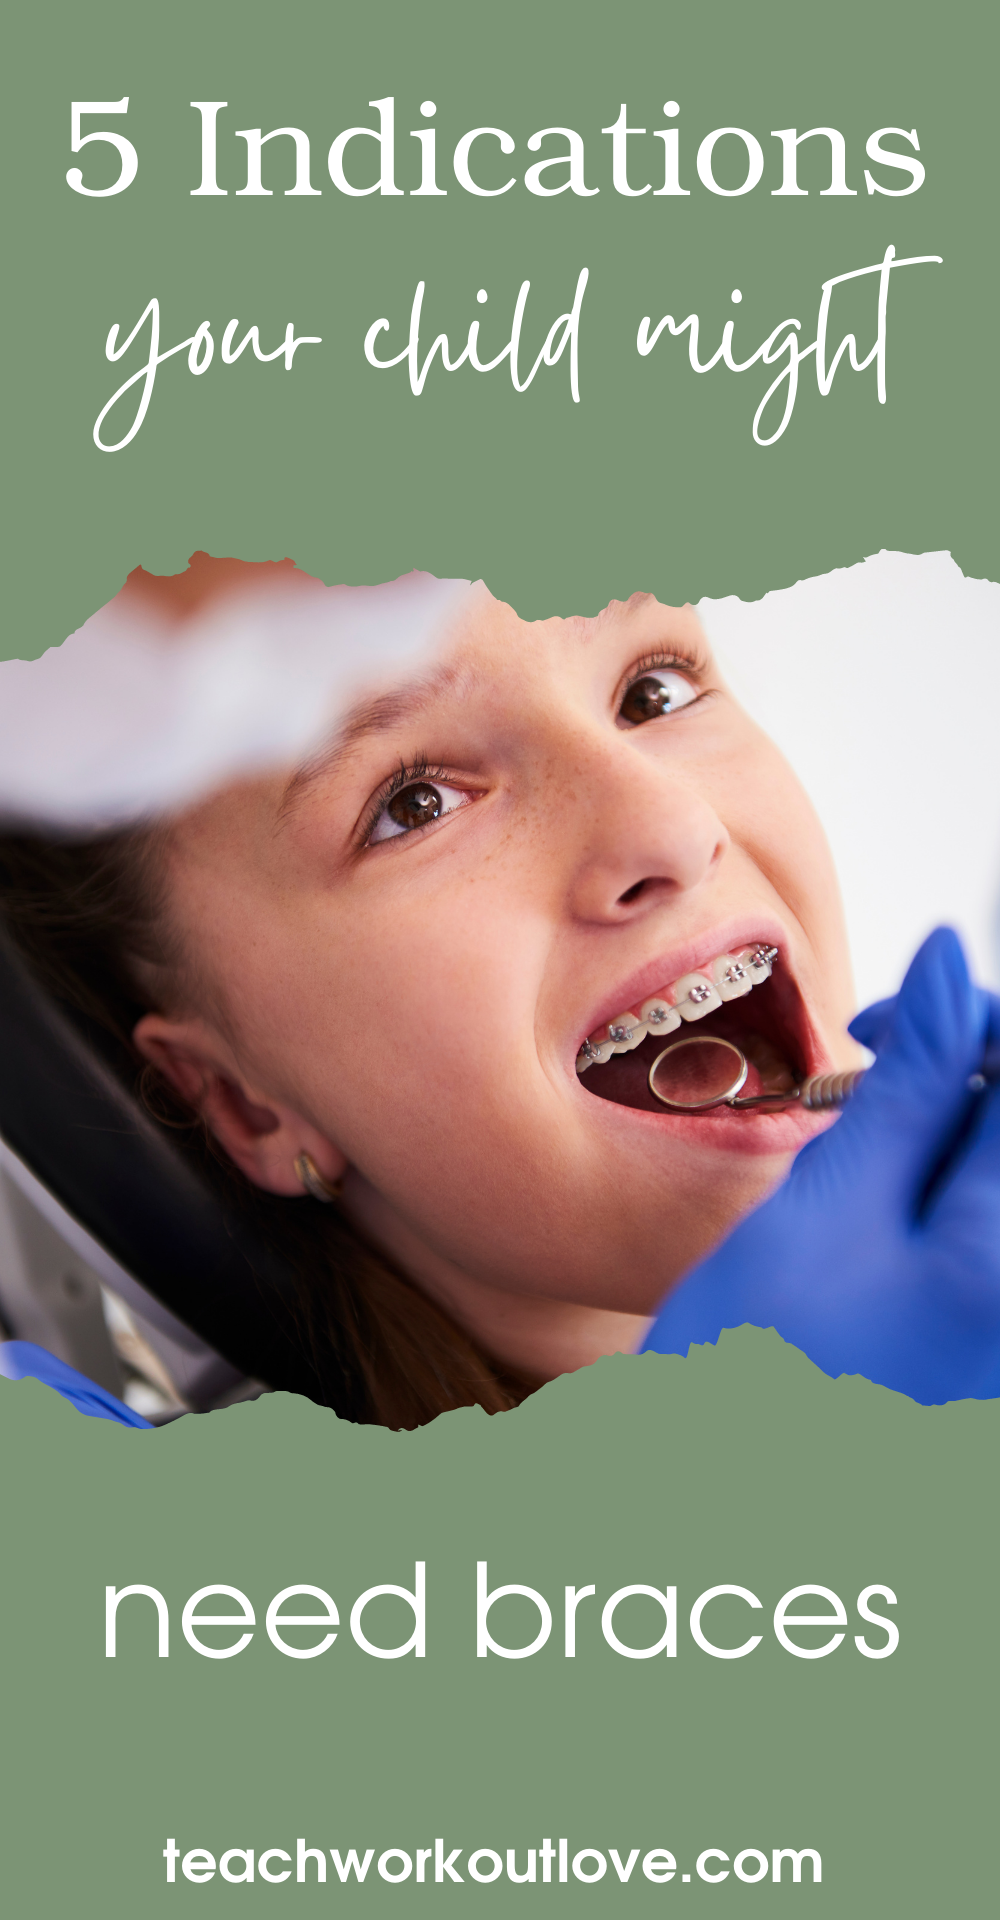 If your child’s teeth aren’t aligned correctly, this can cause an array of issues. Here are some warning signs that your child may need braces.